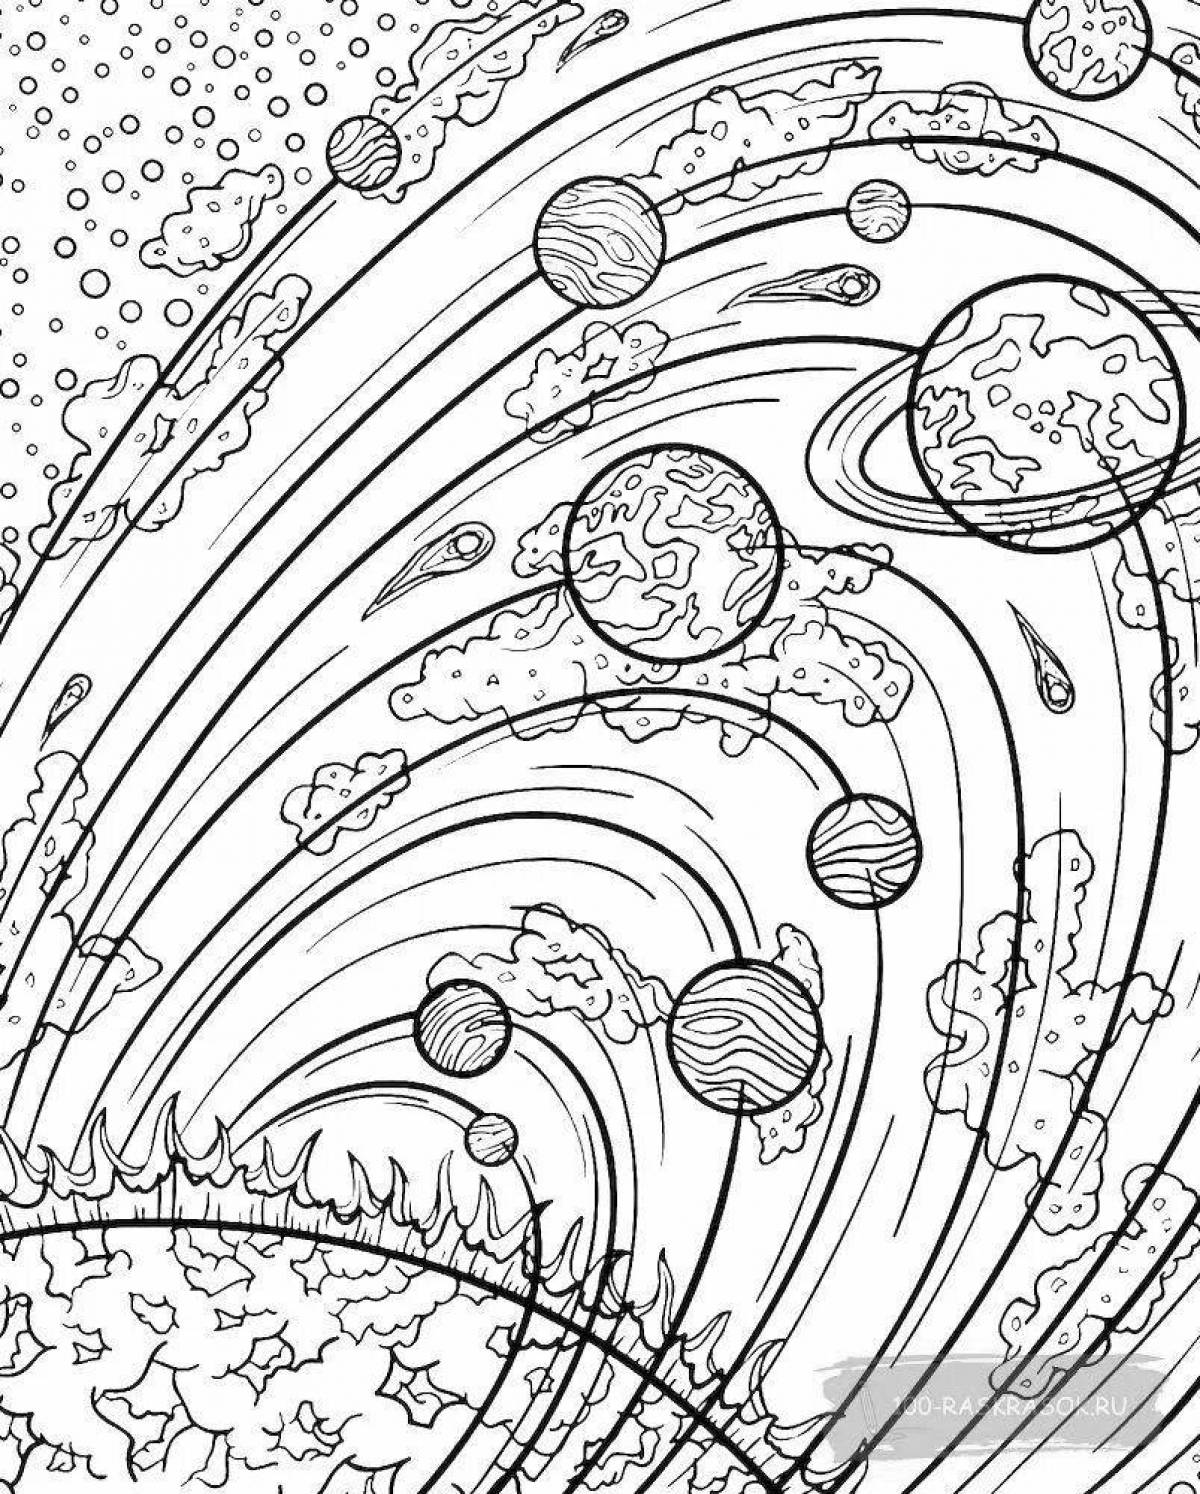 Large space complex coloring book